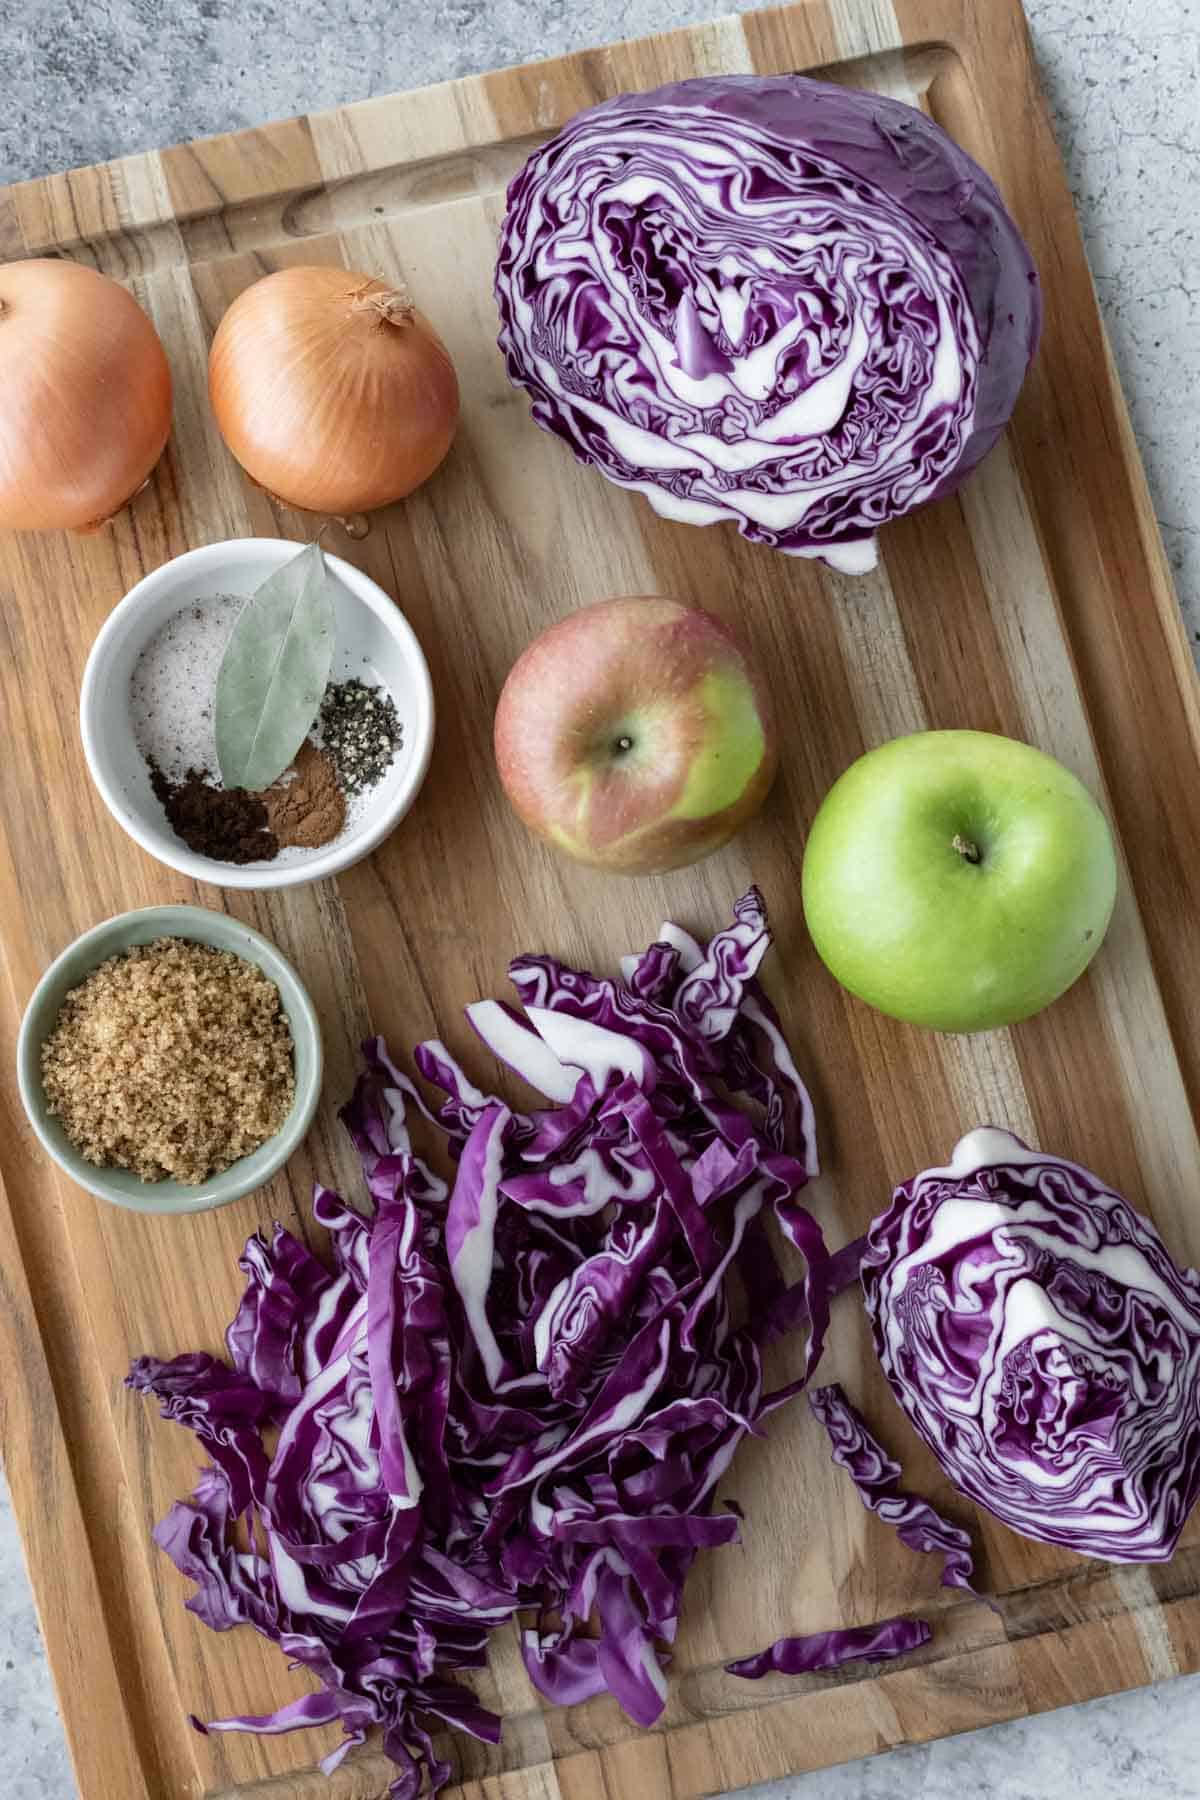 Ingredients needed for Rotkohl laid out on a wood cutting board.